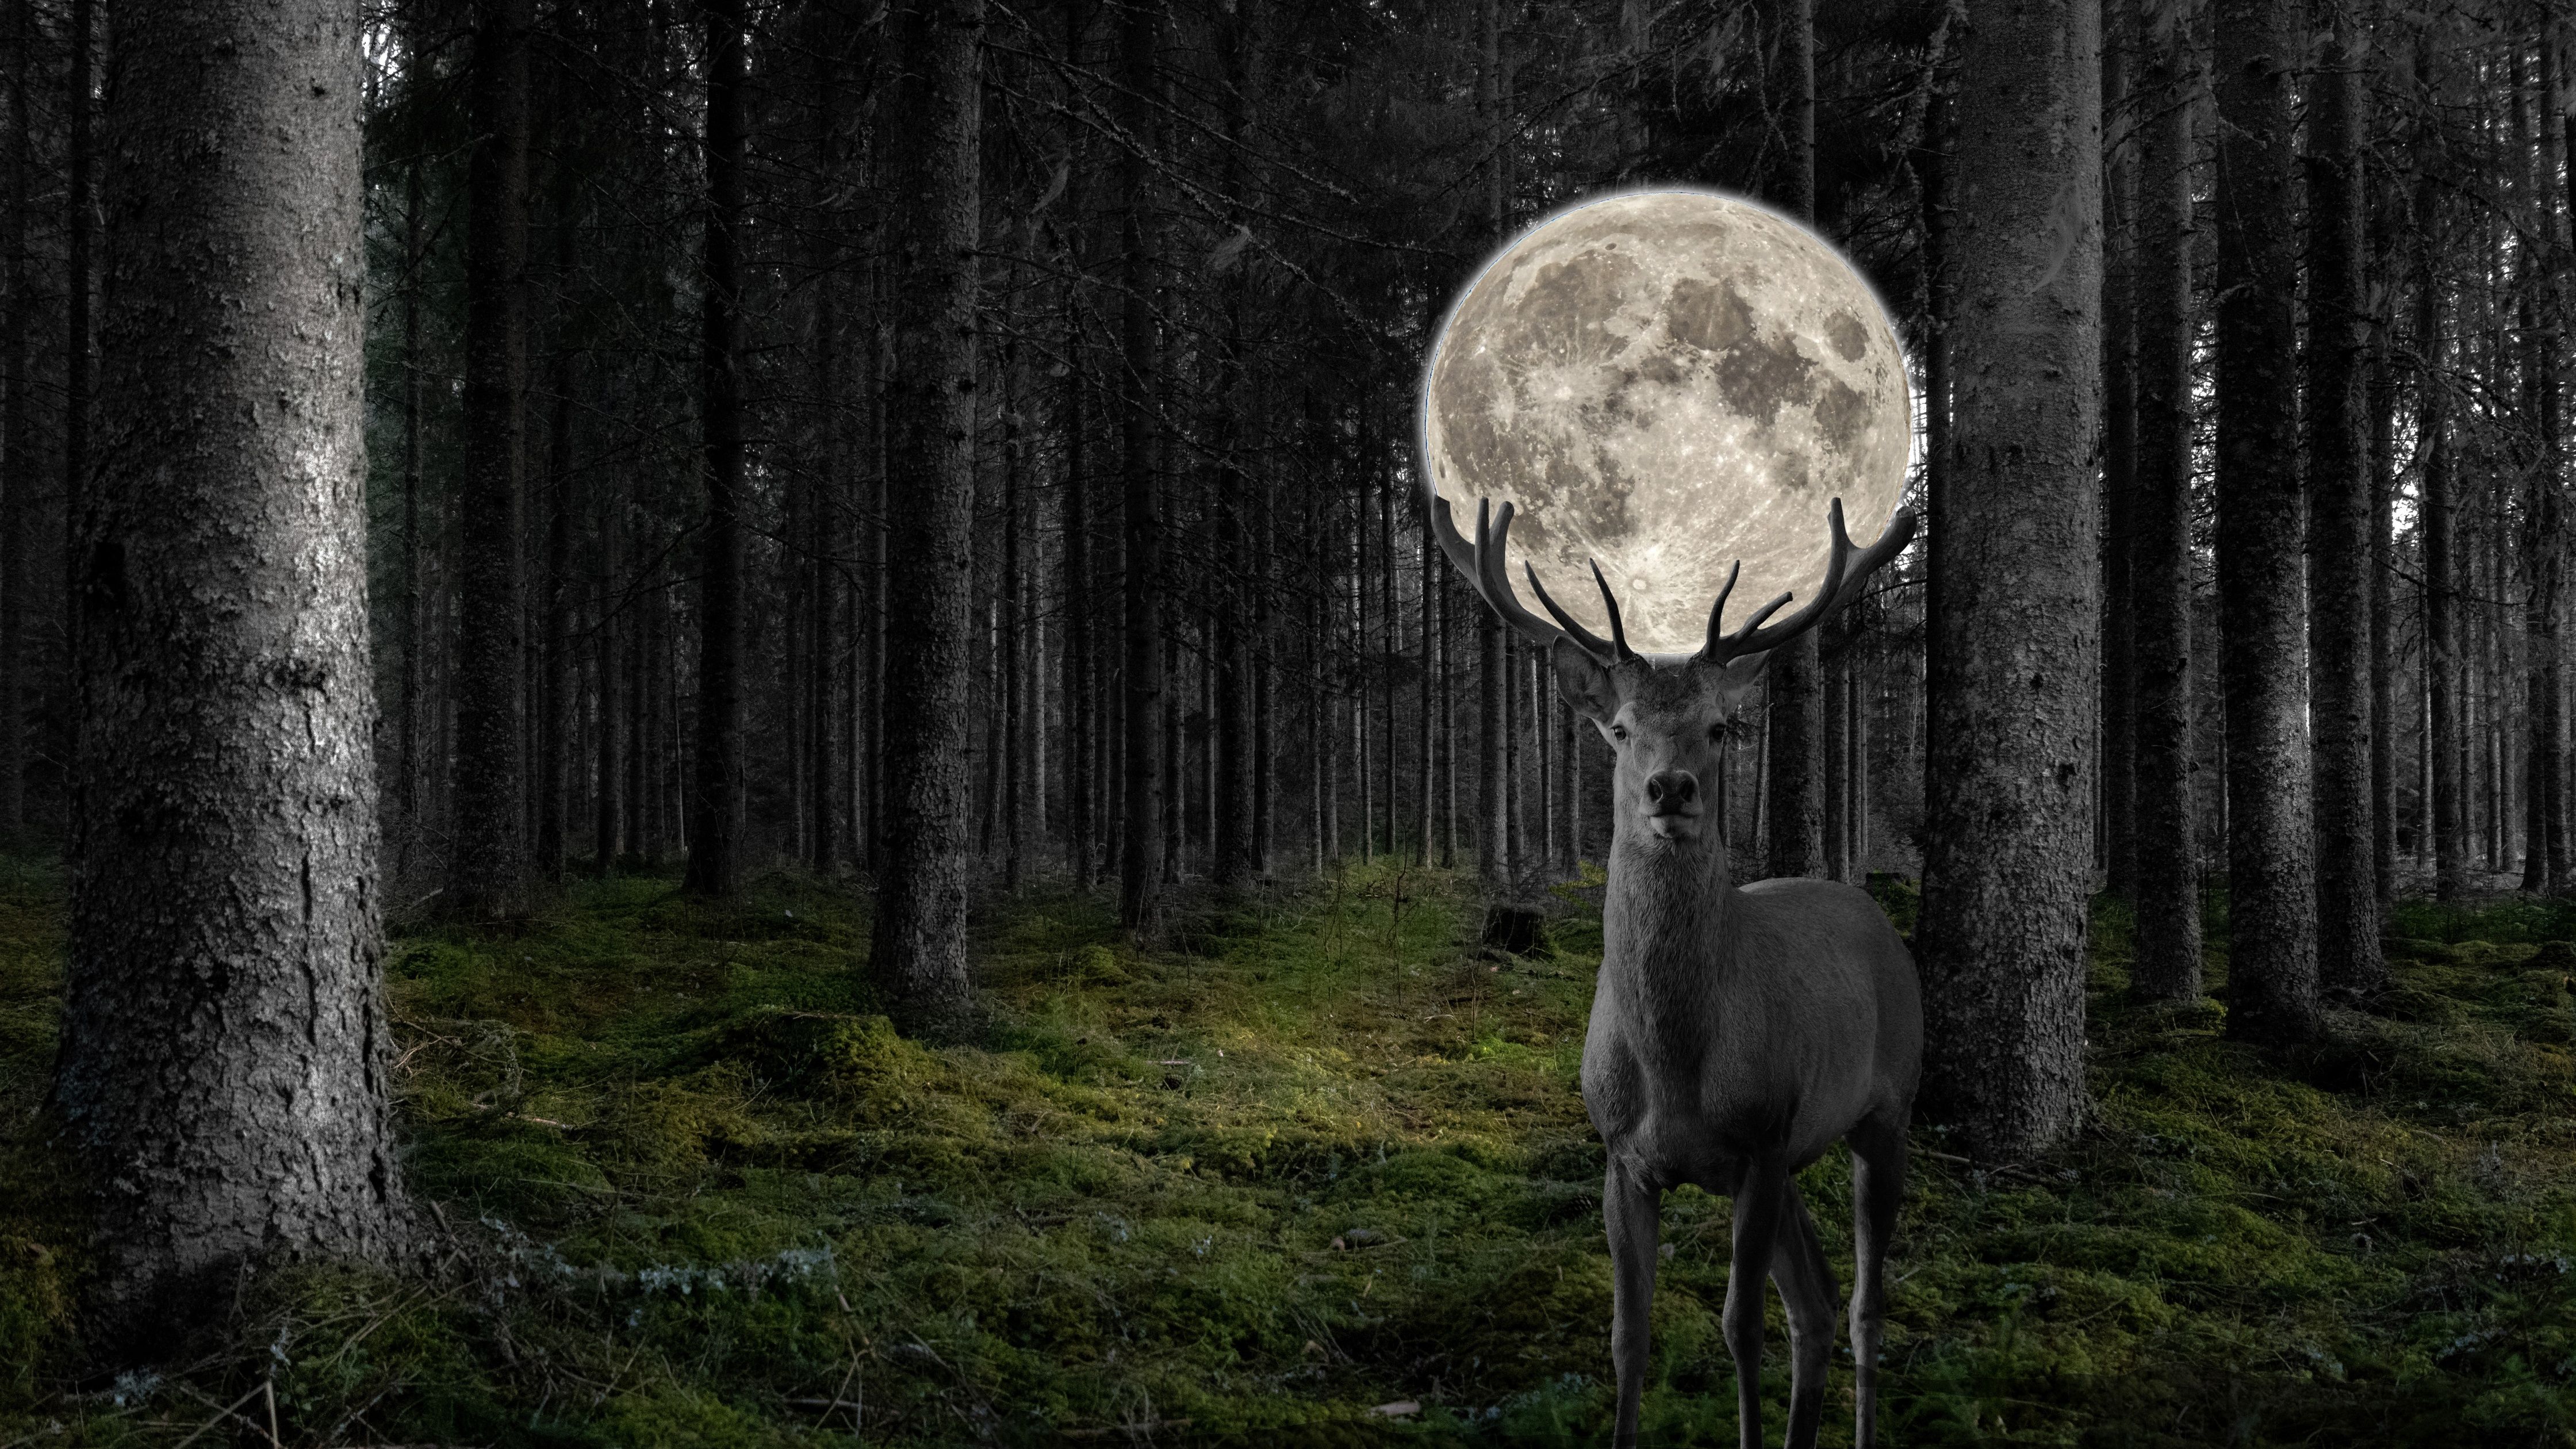 A deer in a forest with a full moon - Deer